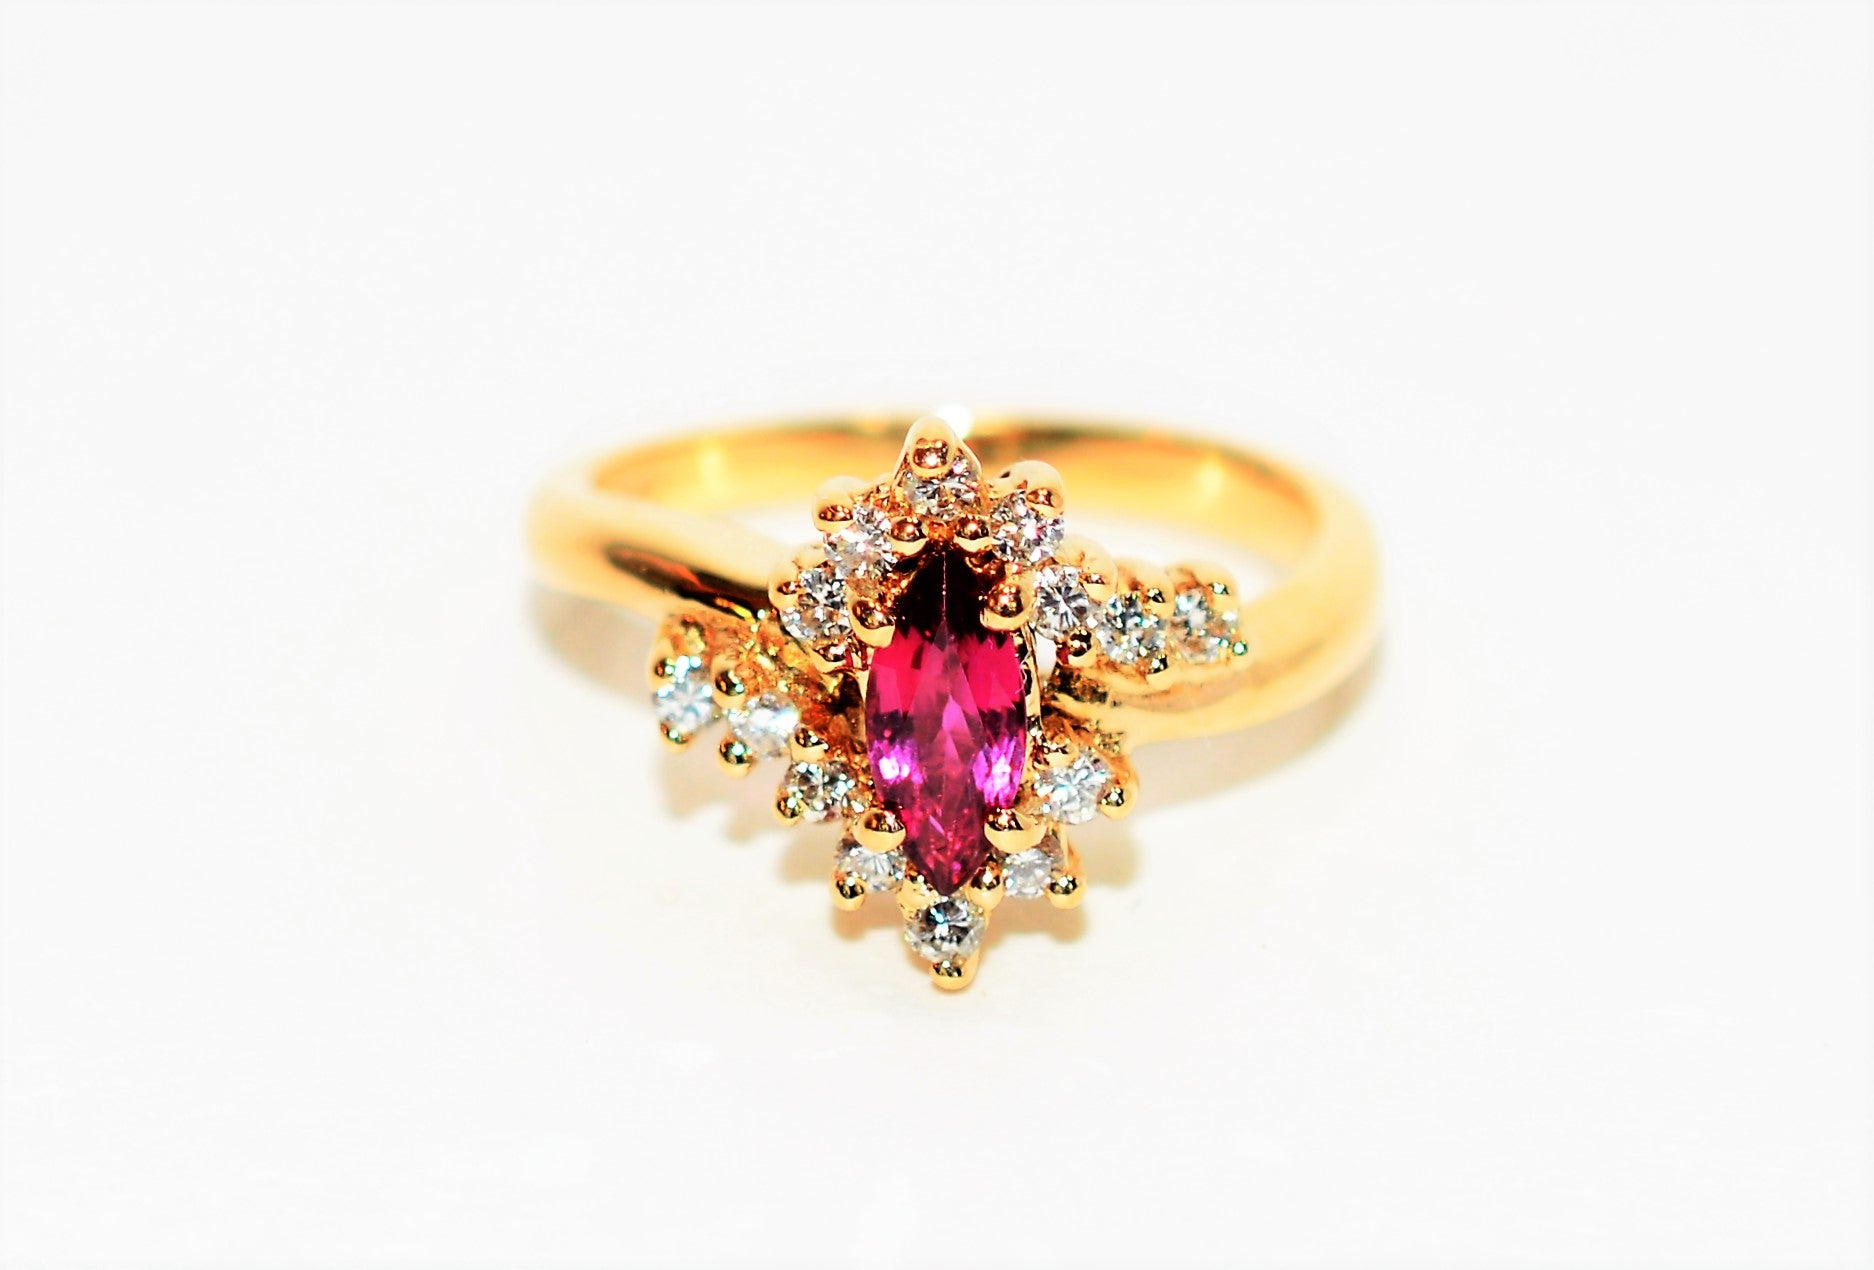 Natural Ruby & Diamond Ring 14K Solid Gold .72tcw Ruby Ring Gemstone Ring Birthstone Ring Engagement Ring Cocktail Statement Ring Estate